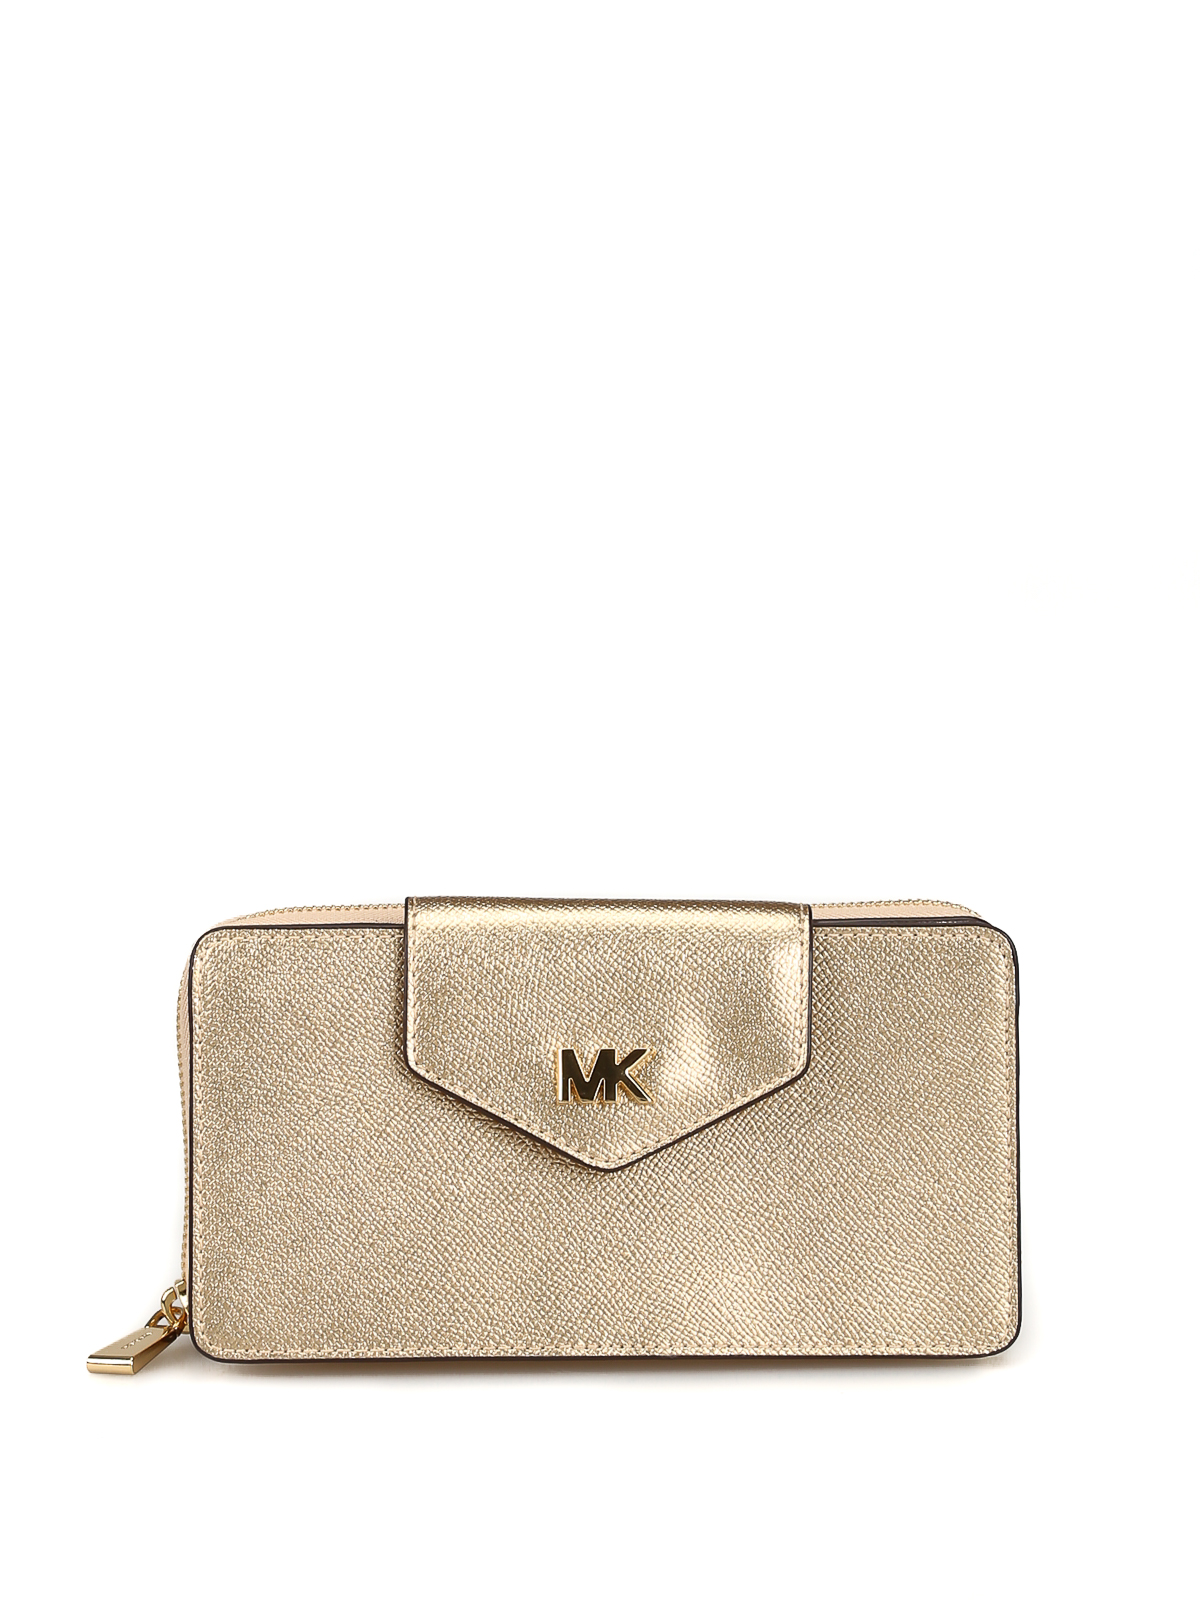 Michael Kors Gold-Toned Leather Tote Bag